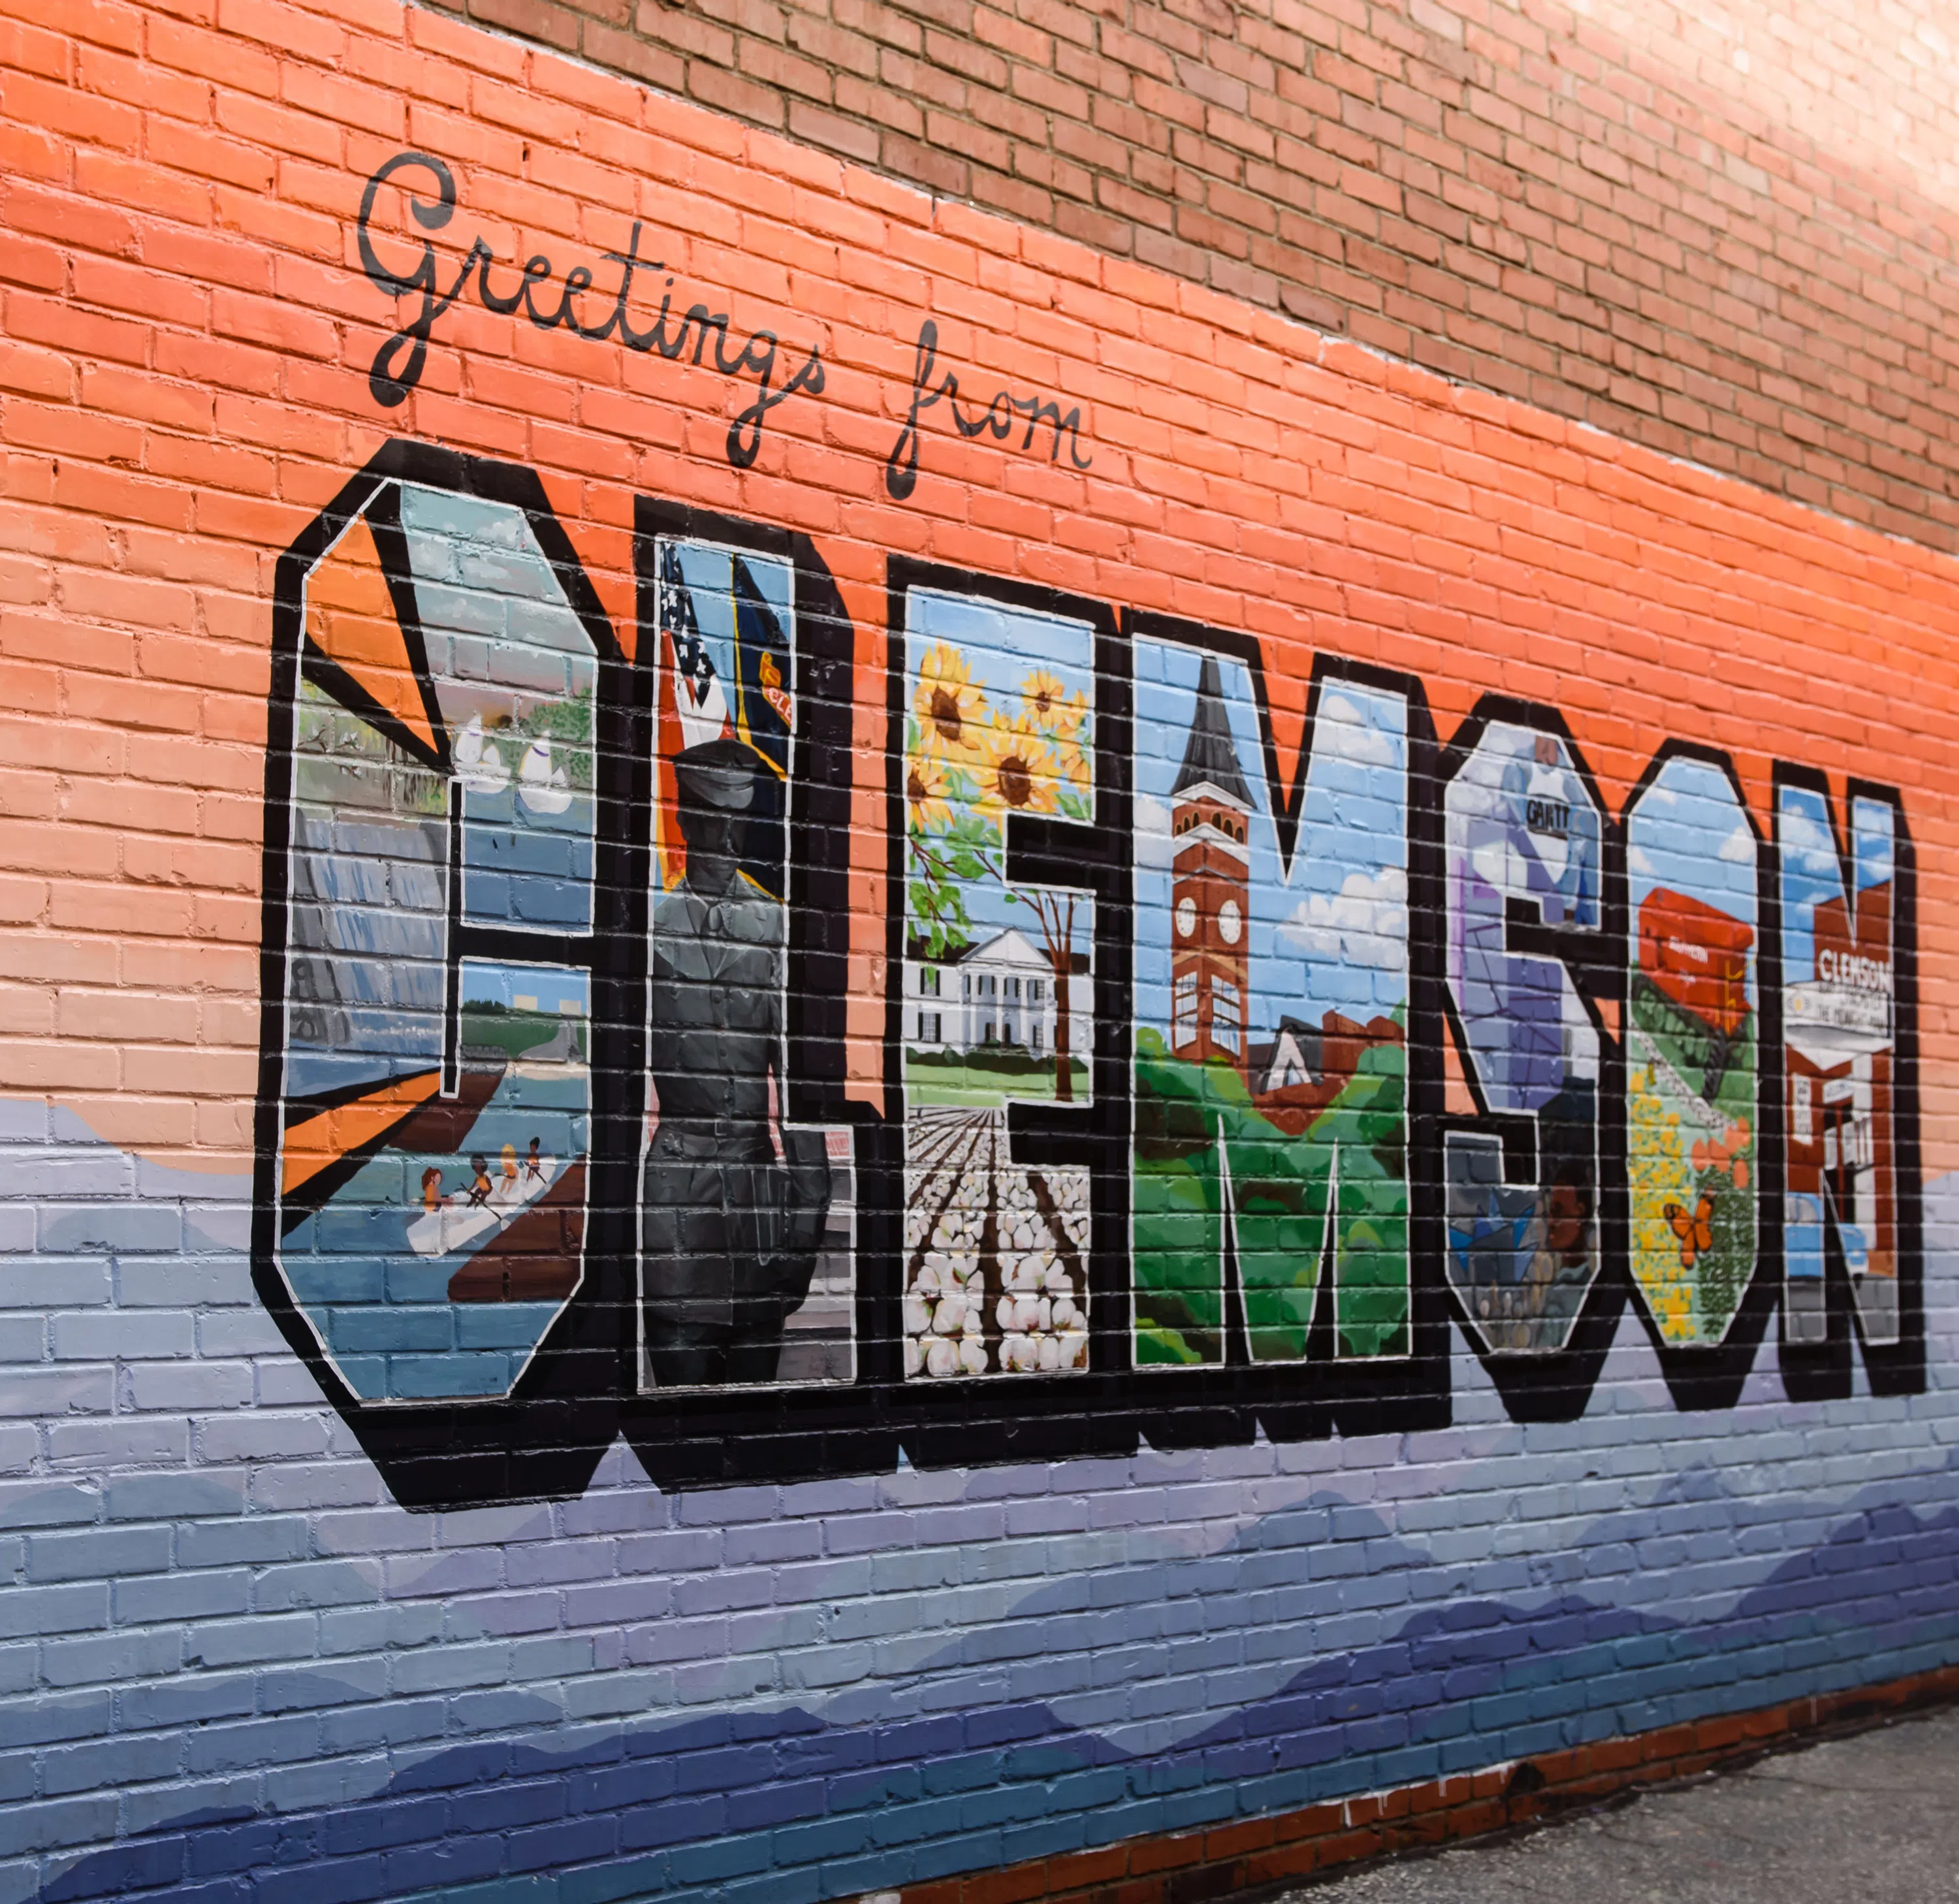 A mural on a brick wall in downtown Clemson that reads "Greetings from CLEMSON."